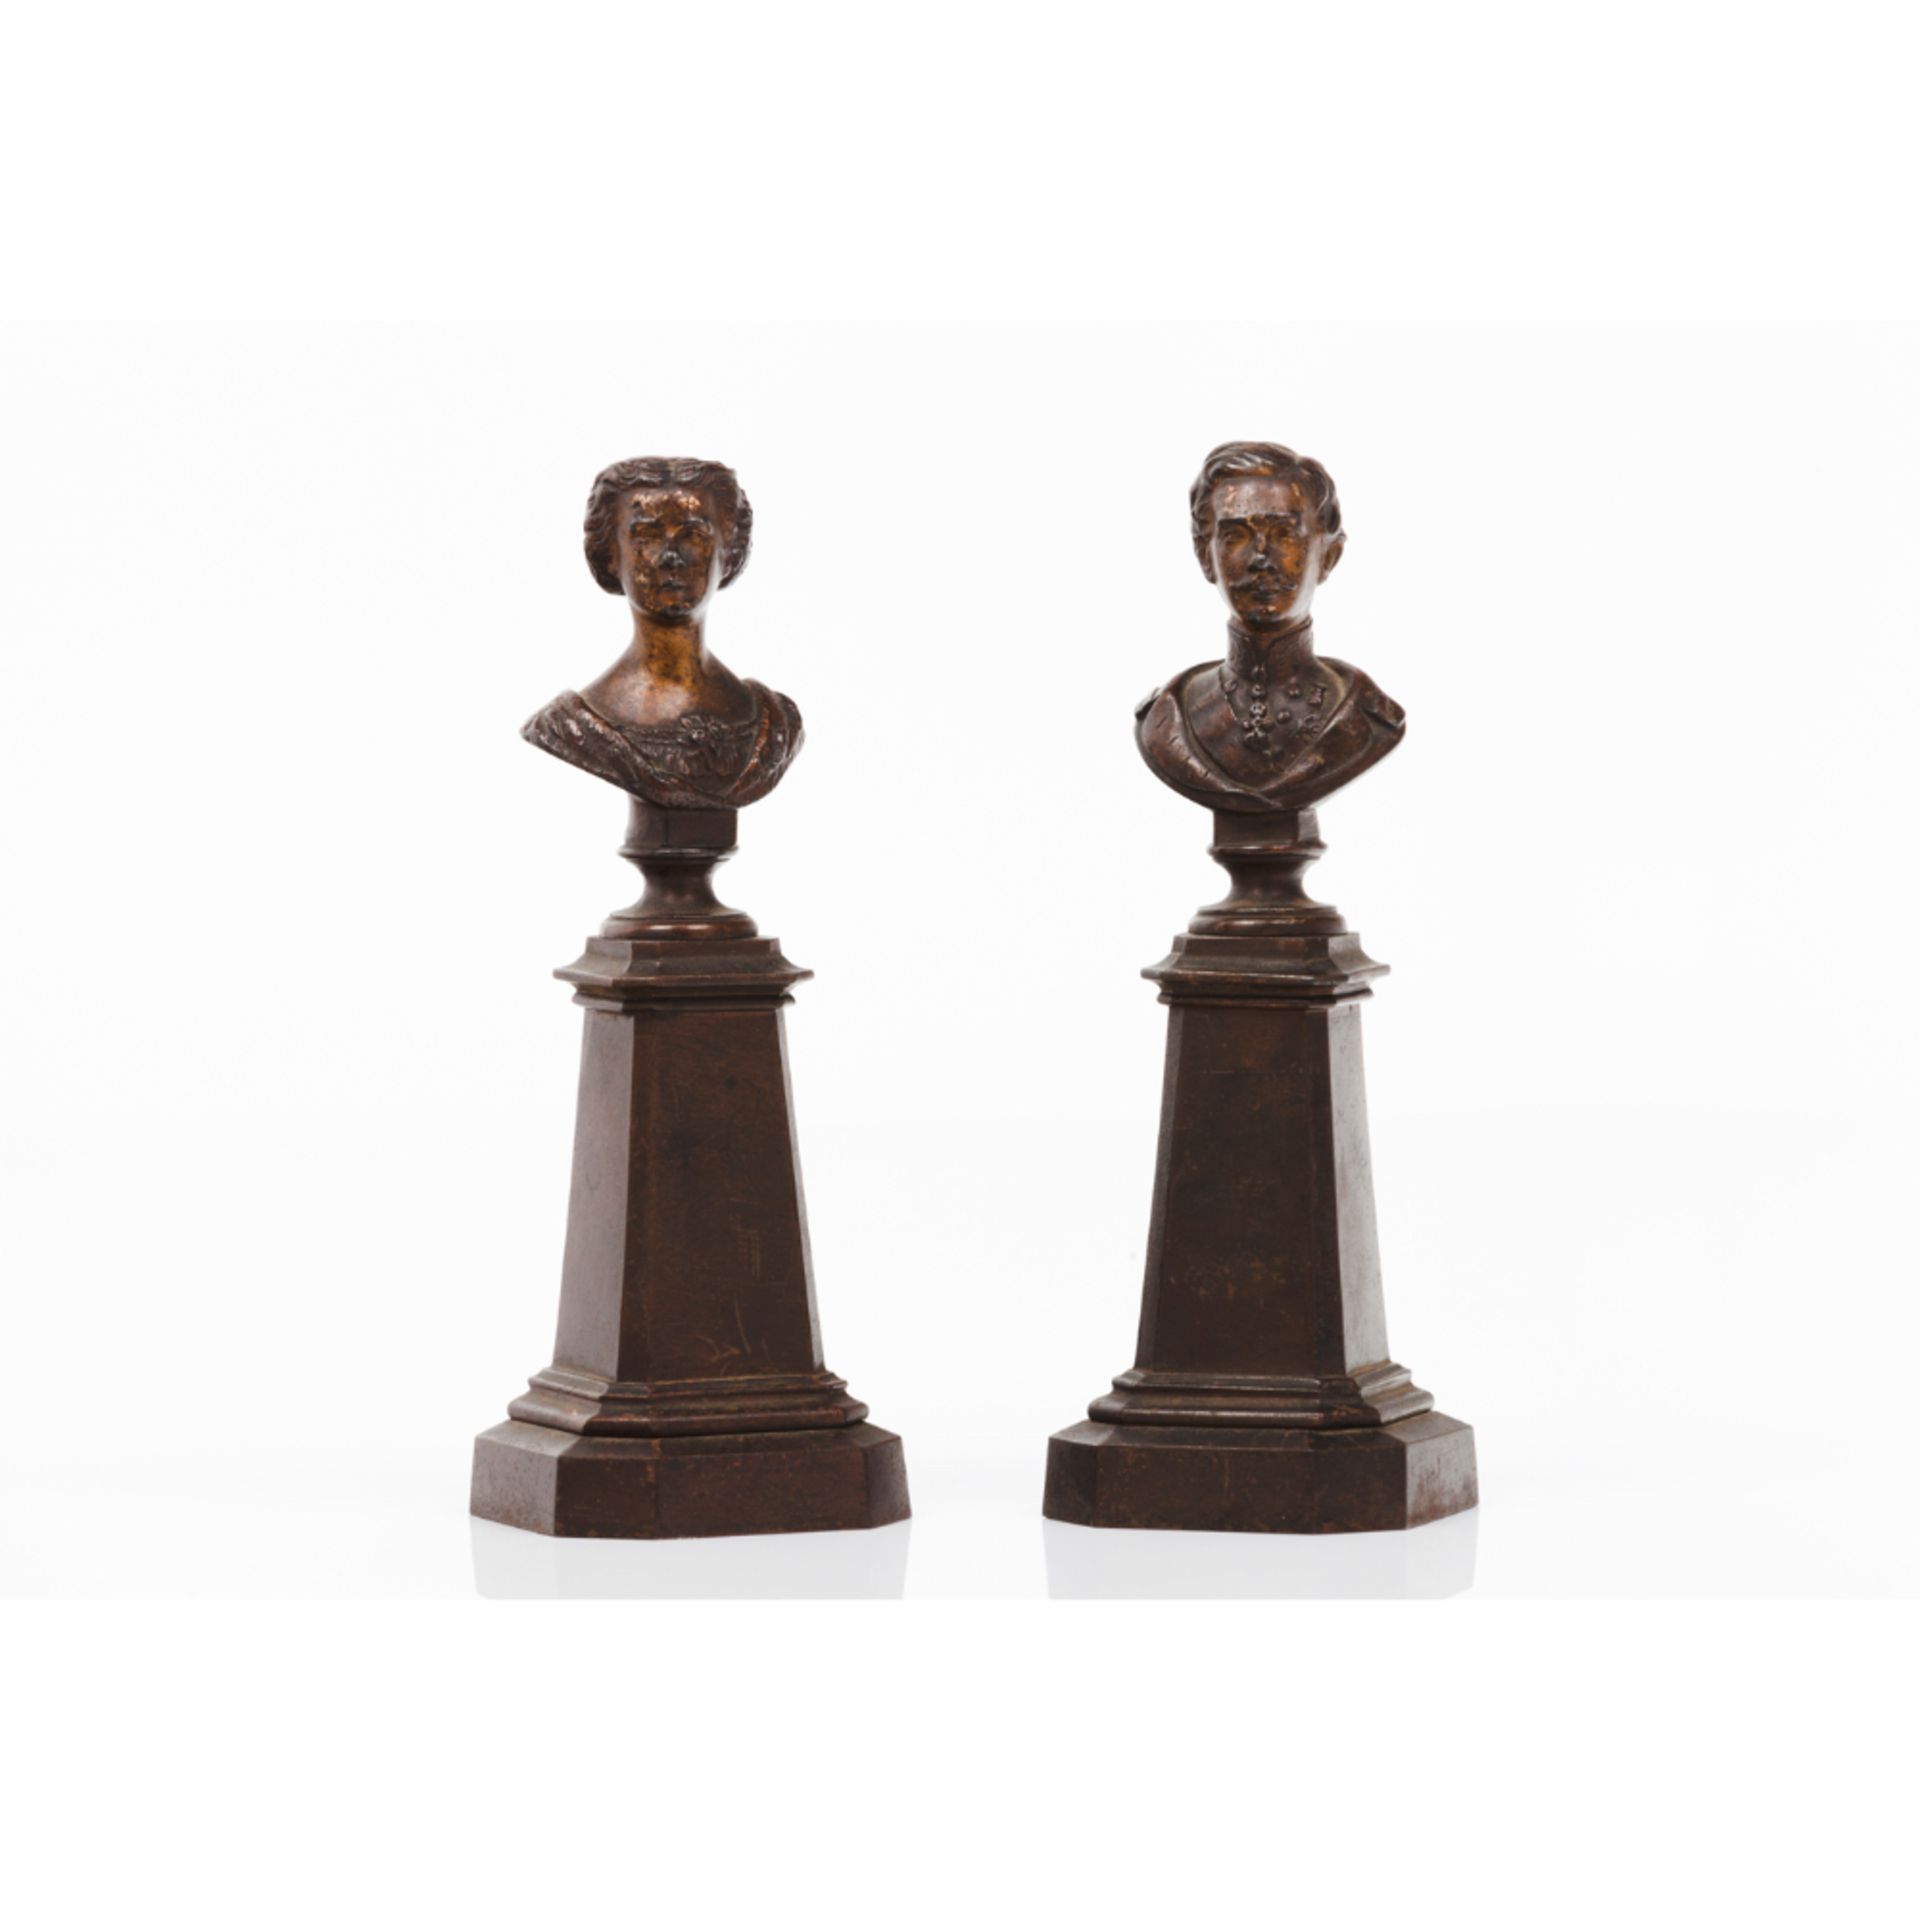 A pair of bustsPossibly King Alfonso XII of Spain and Queen Maria Cristina of Habsburg Patinated